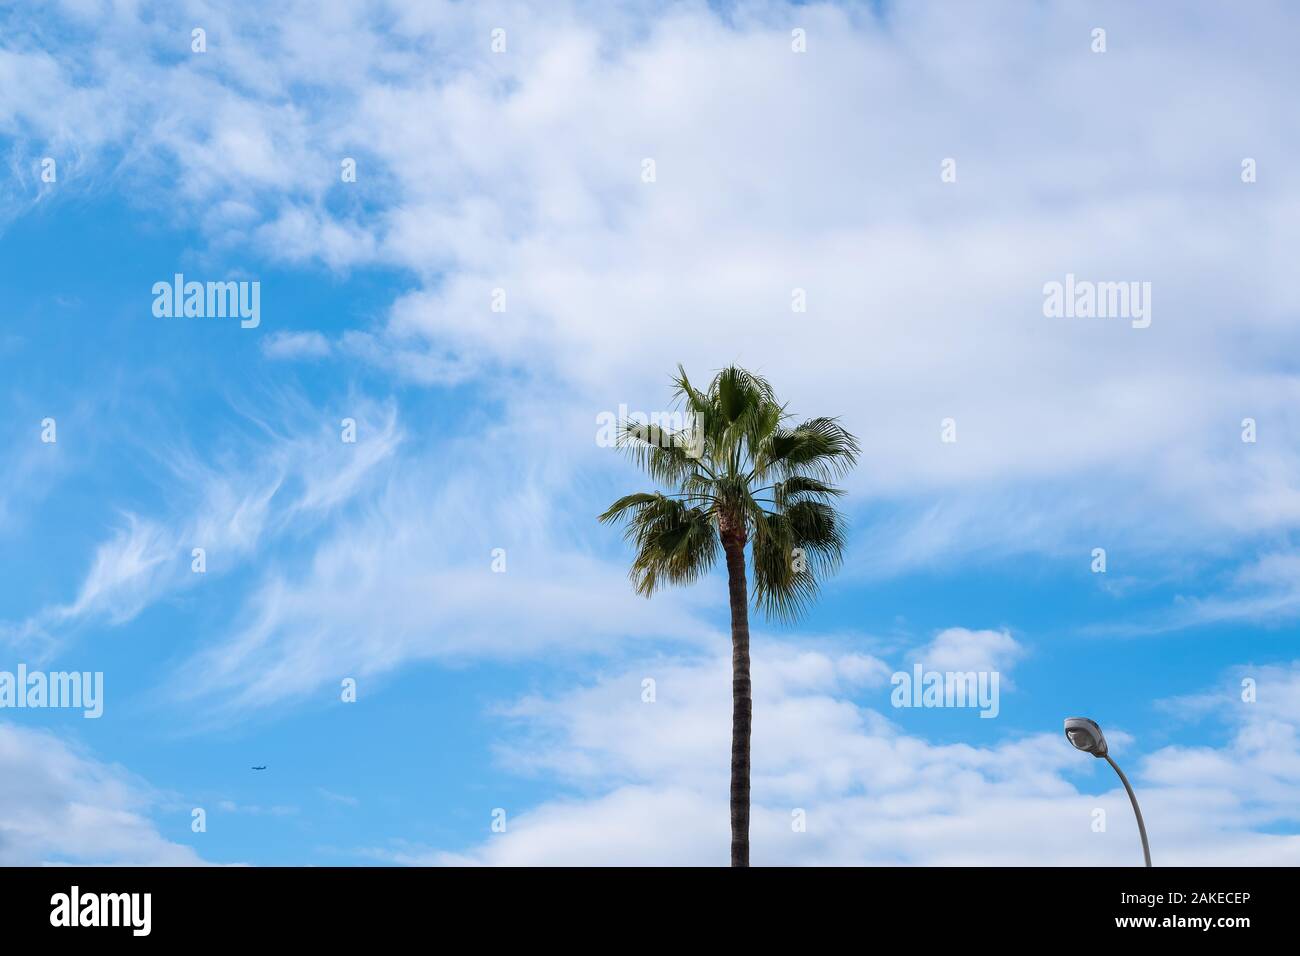 low angle view of one high palm tree against blue sky with scattered clouds Stock Photo